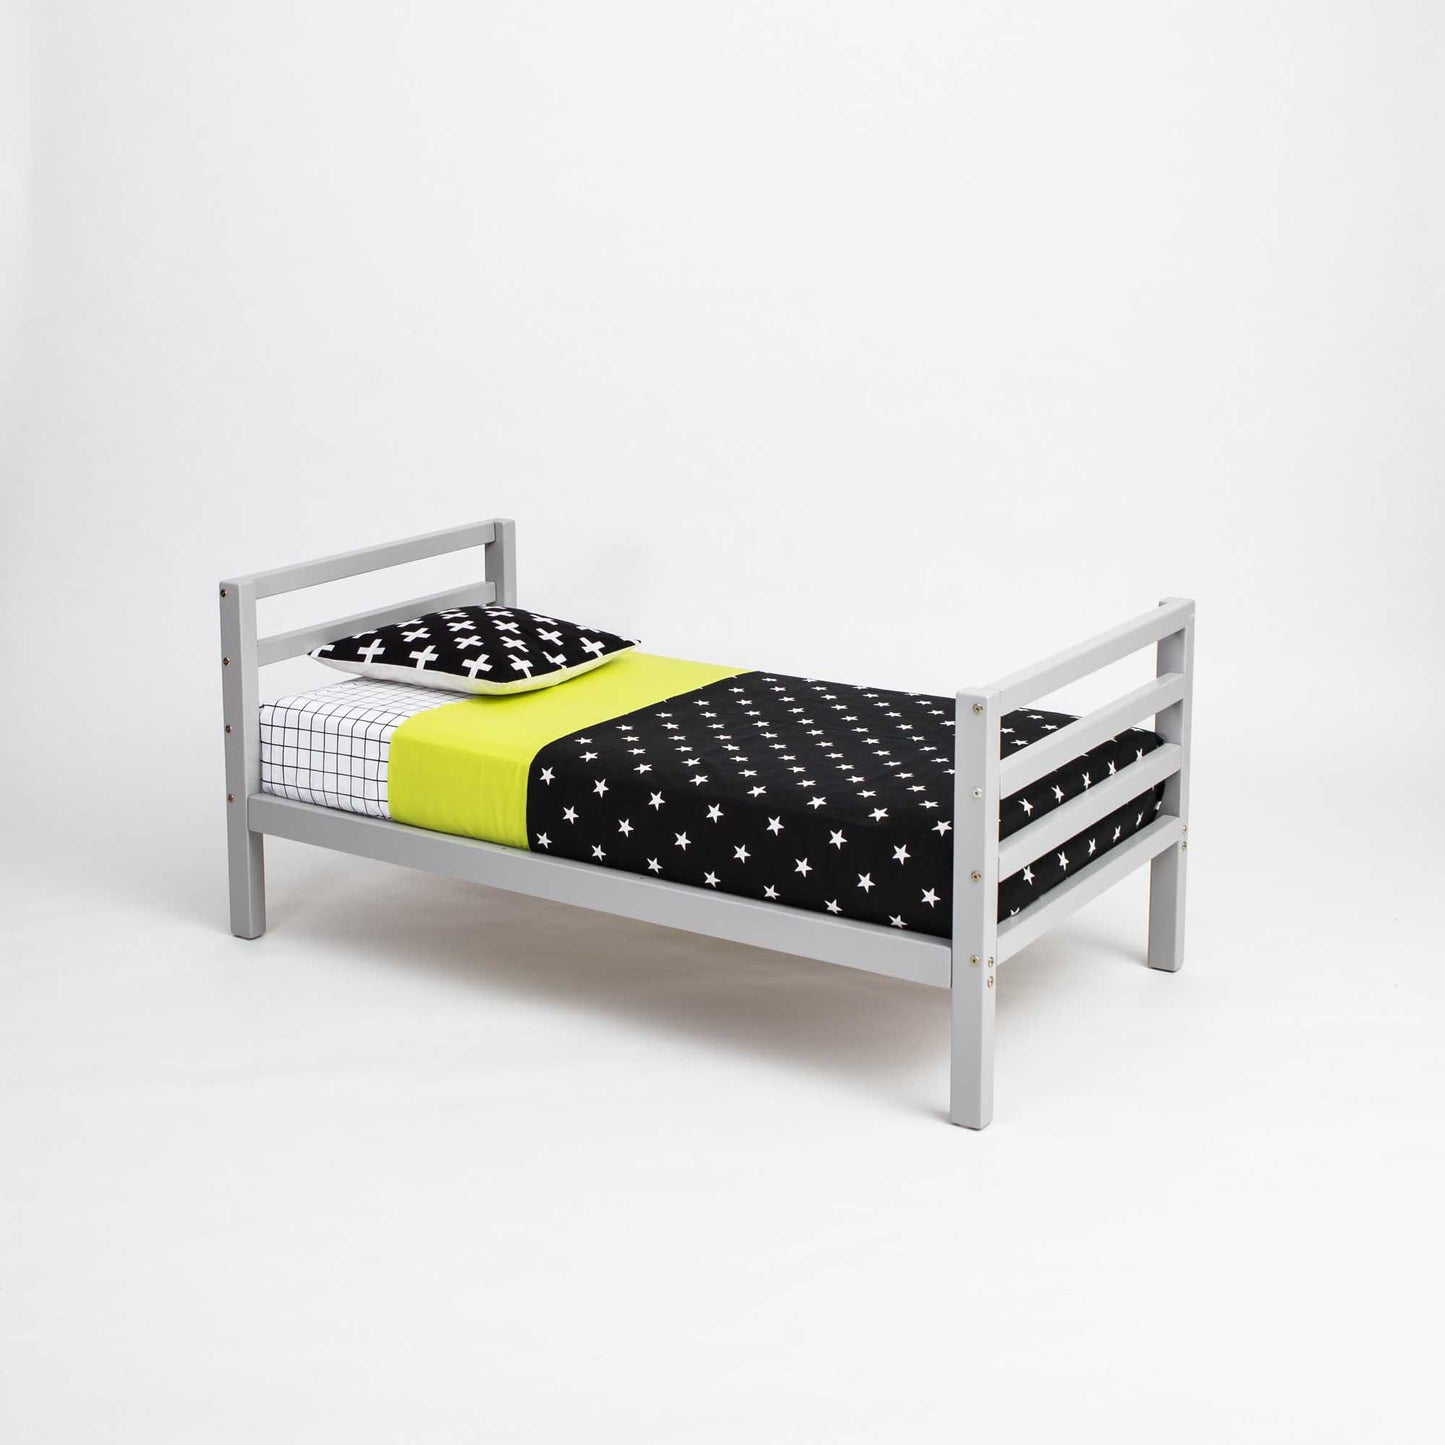 Kids' bed on legs with a horizontal rail headboard and footboard